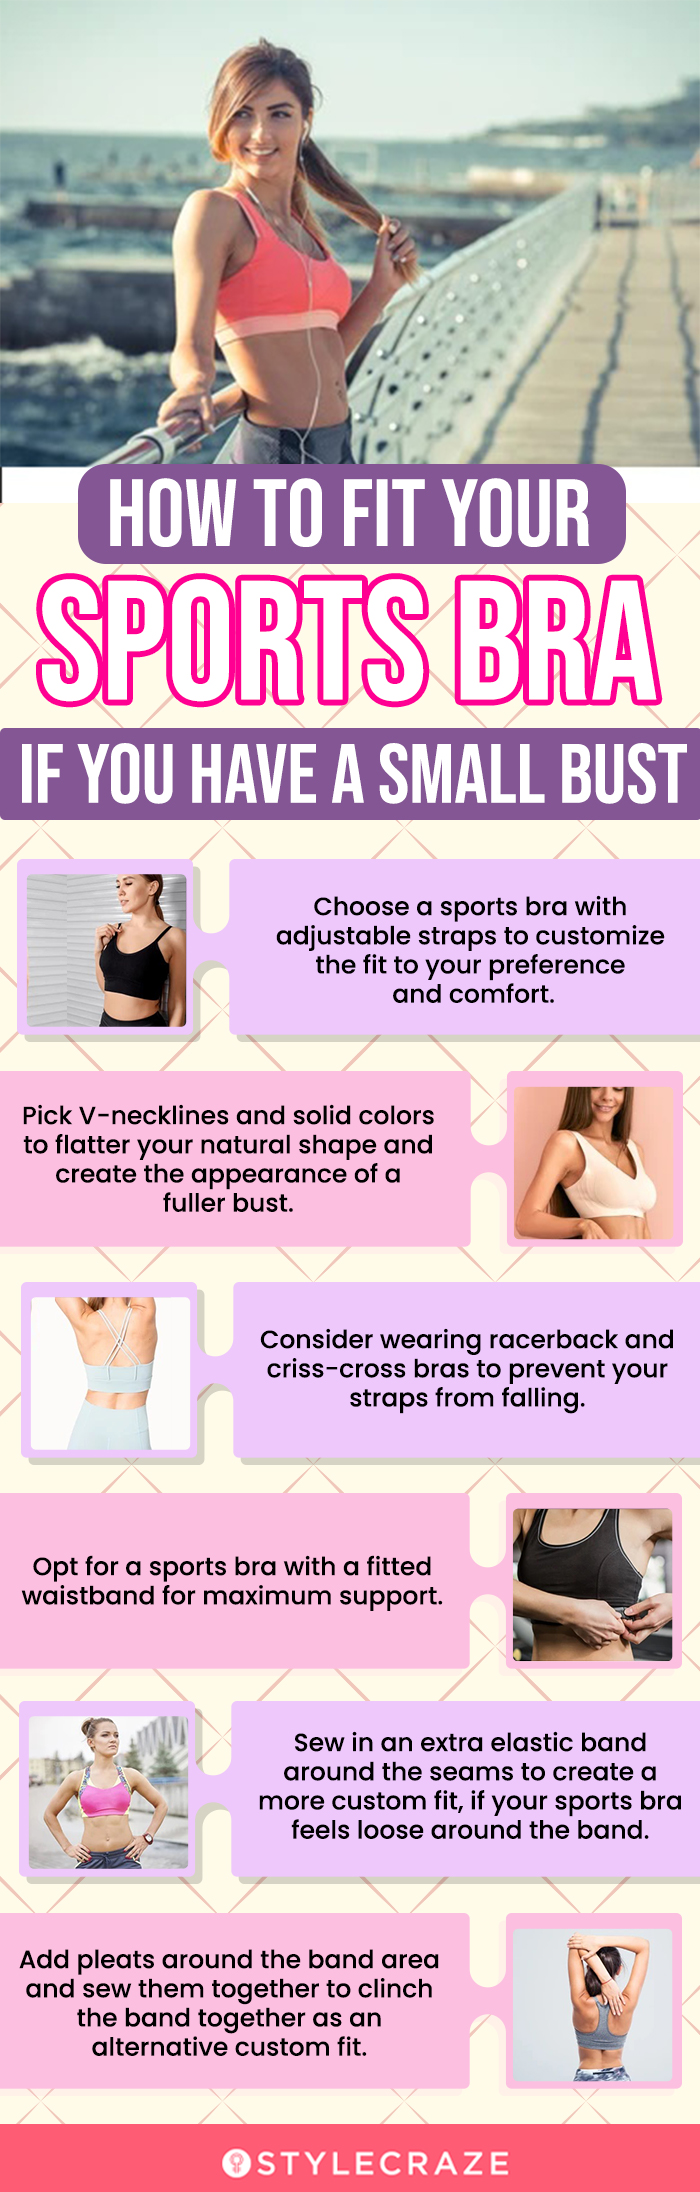 How To Fit Your Sports Bra If You Have A Small Bust (infographic)